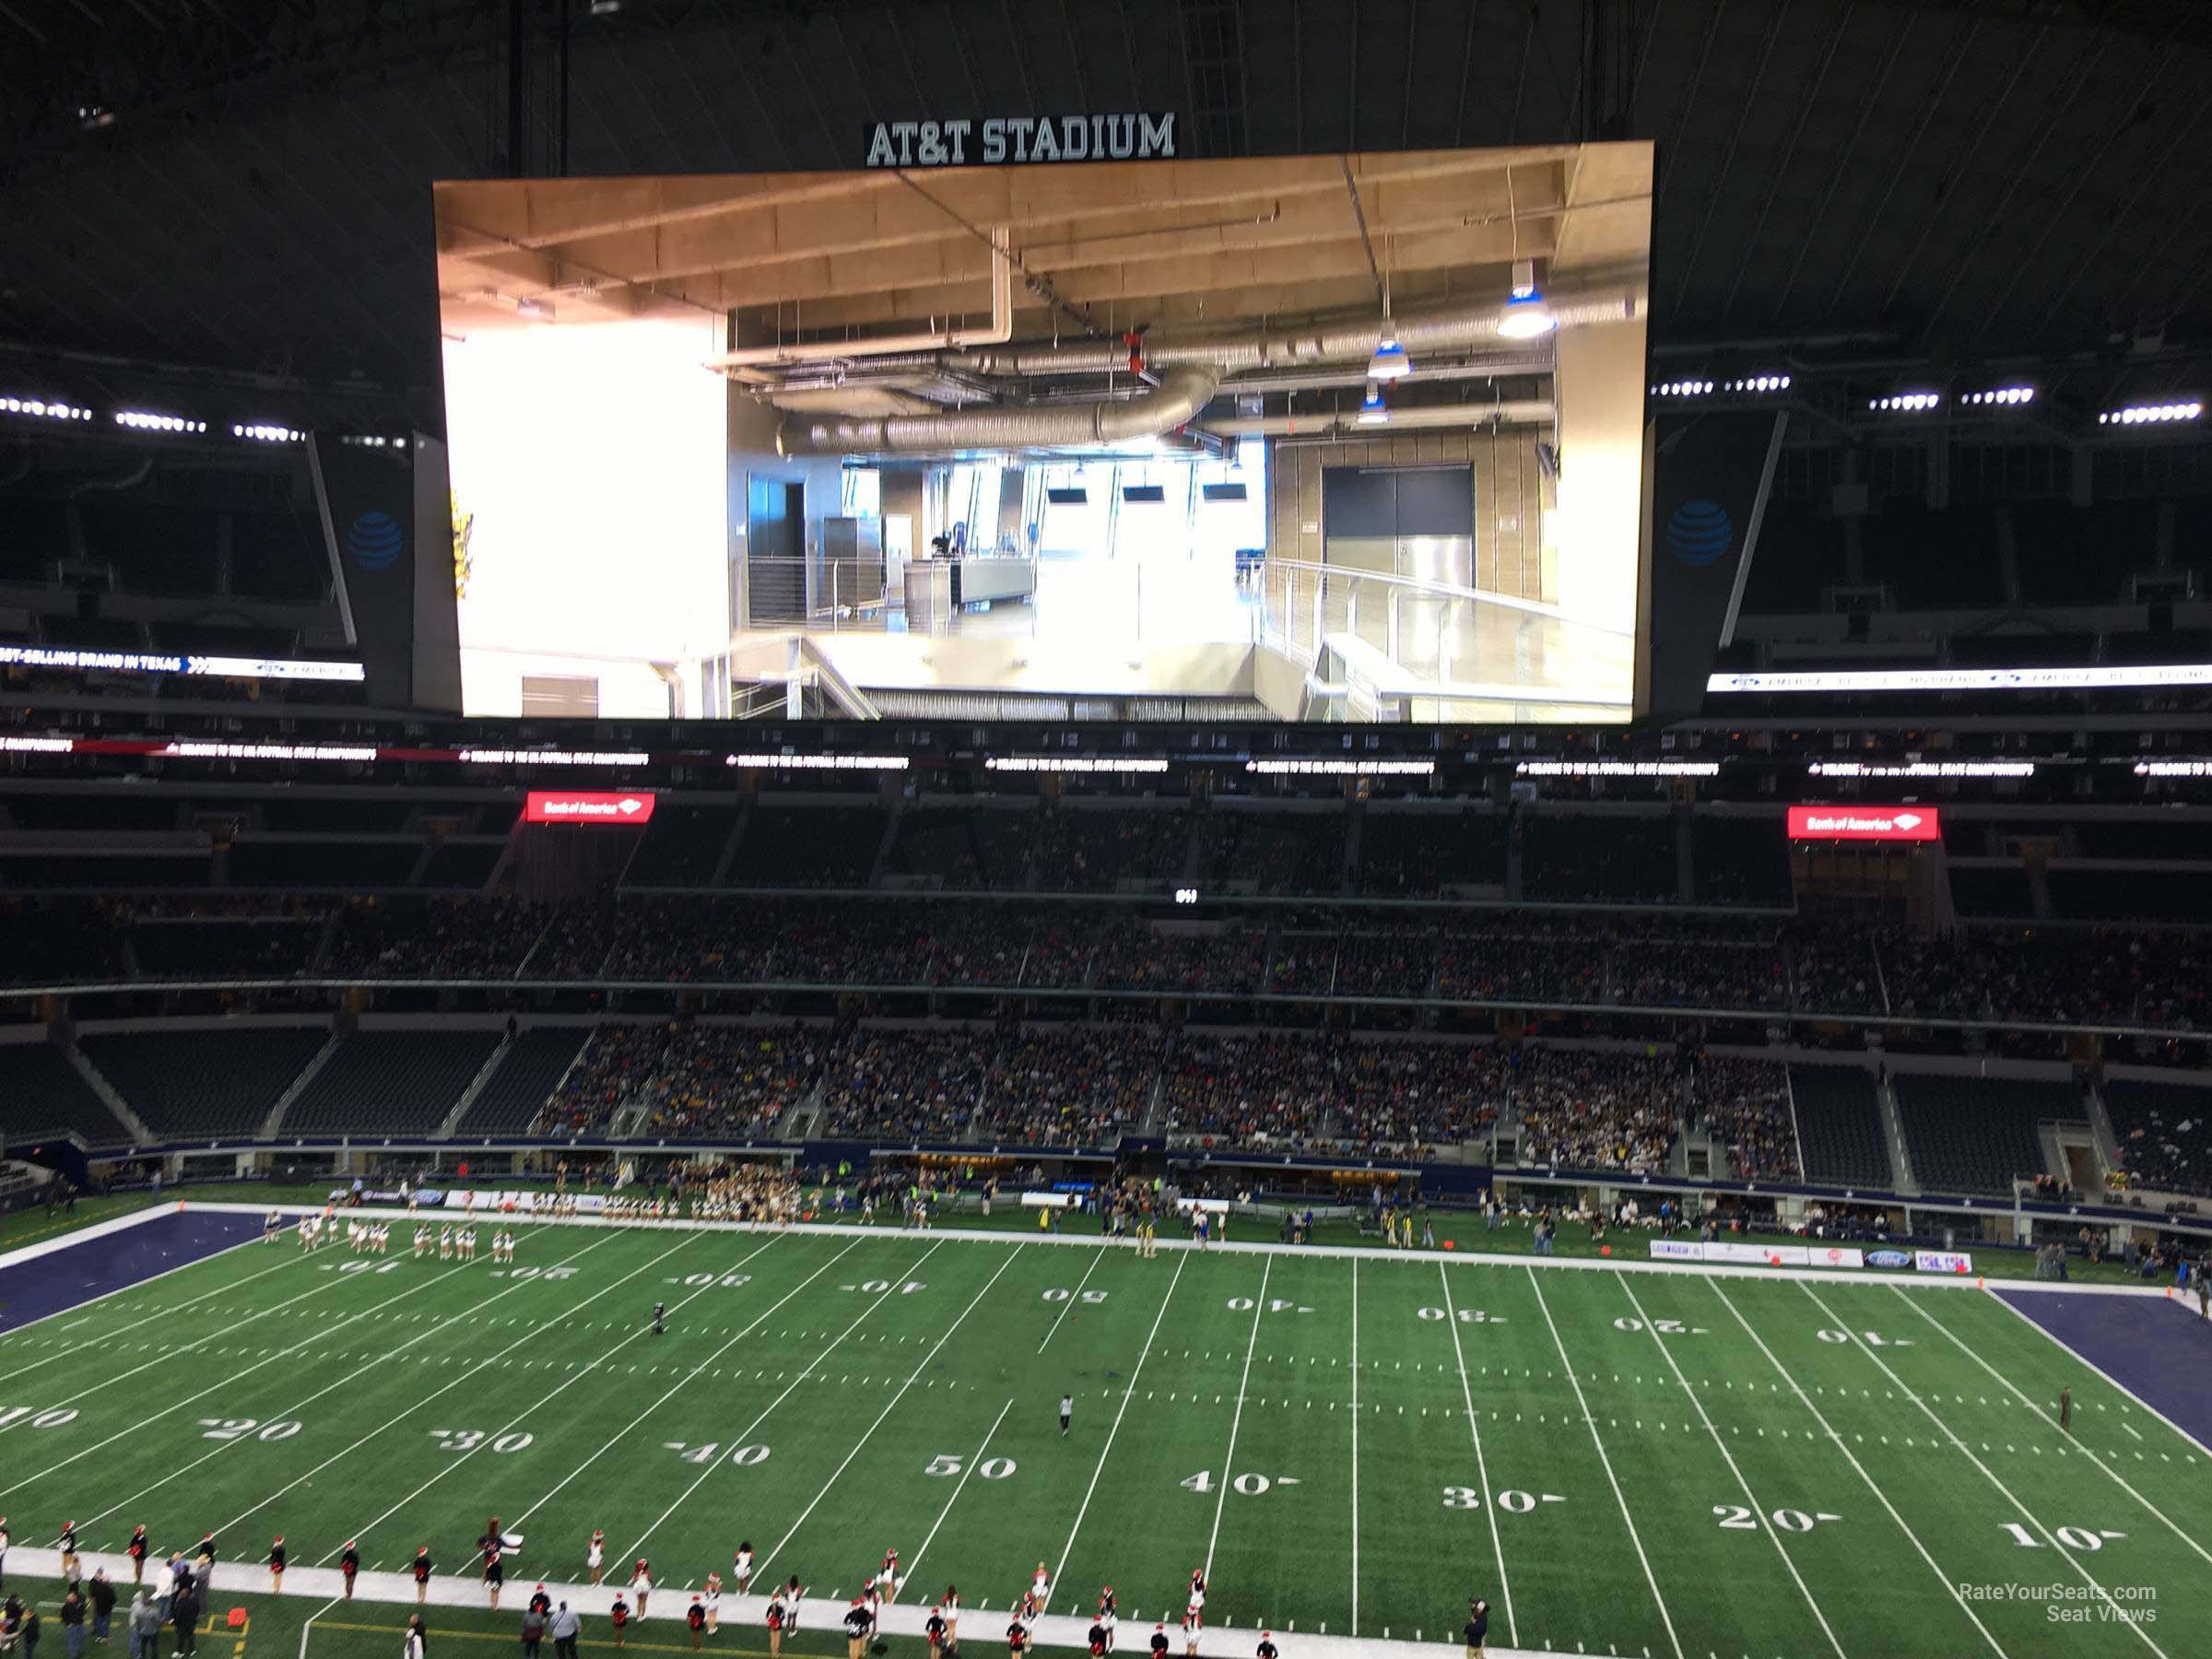 section c309, row 10 seat view  for football - at&t stadium (cowboys stadium)